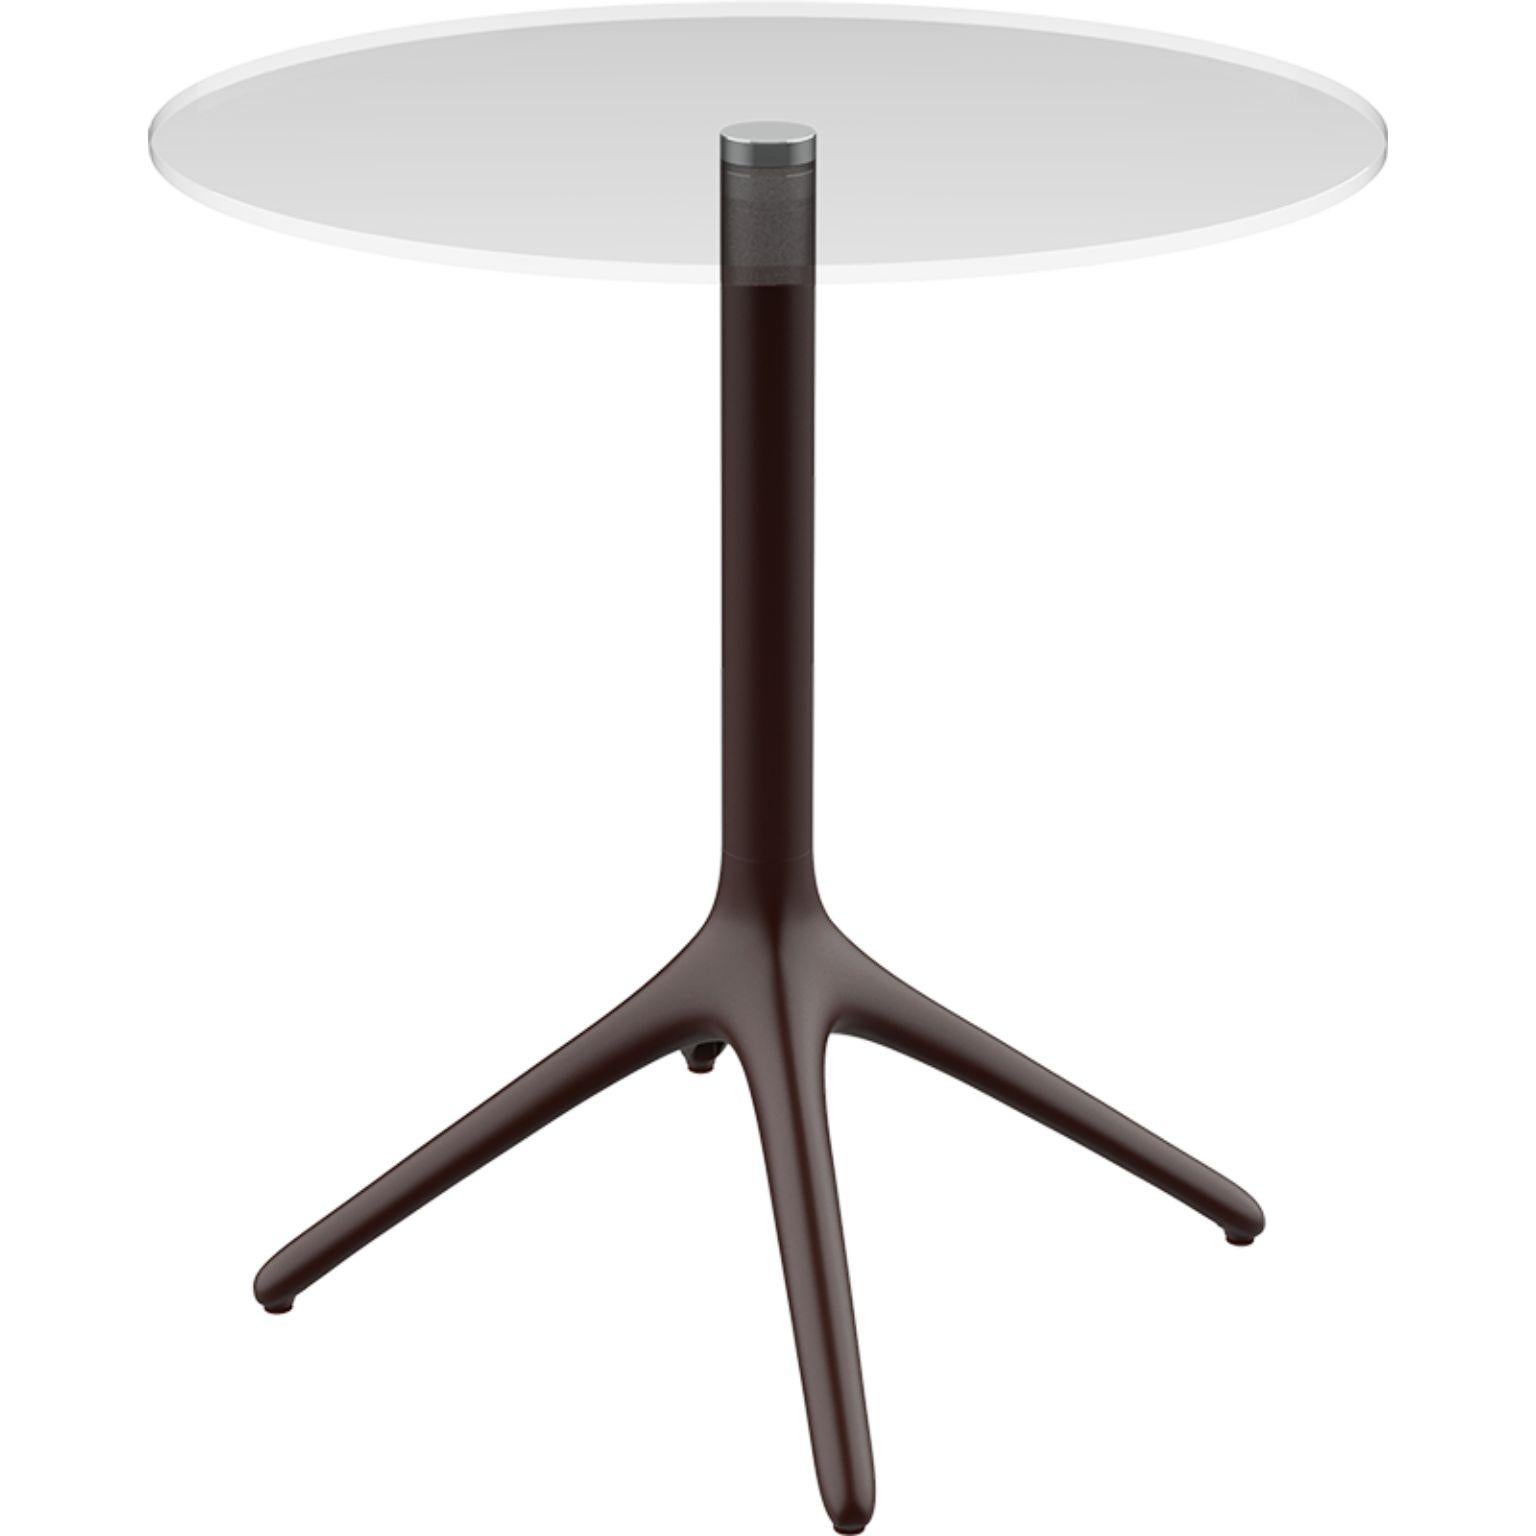 Spanish Uni Grey Table 73 by Mowee For Sale